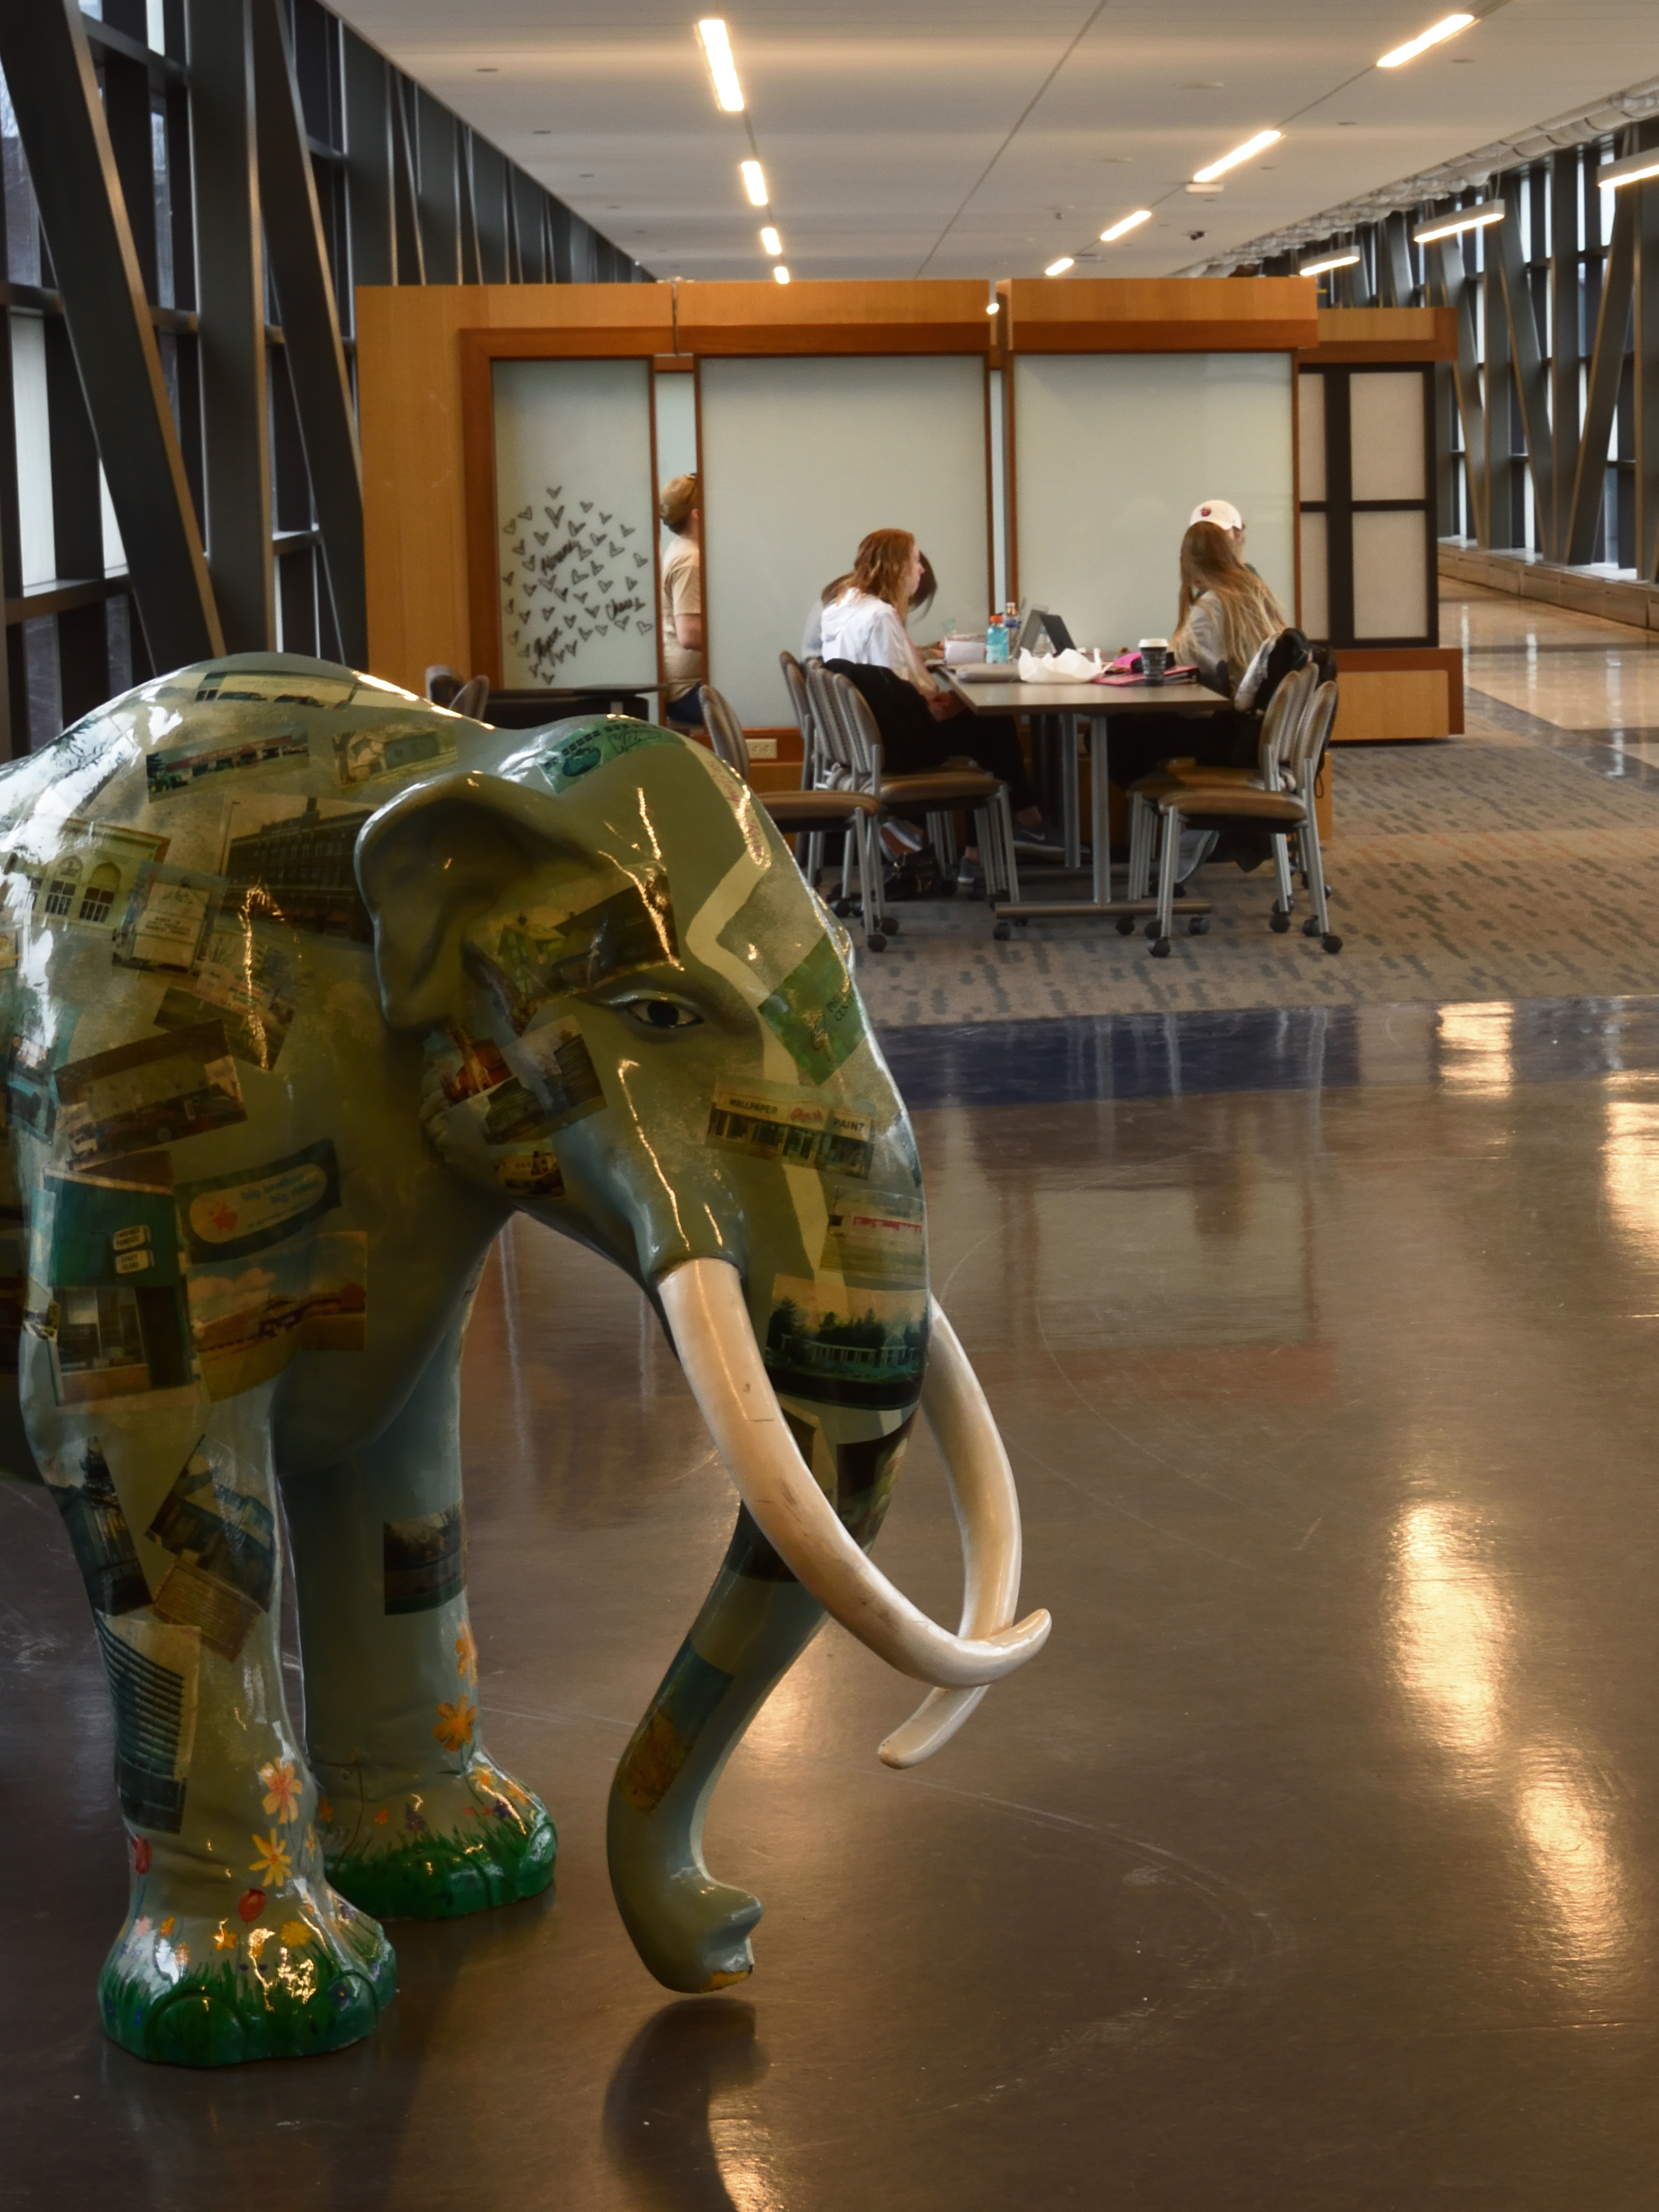 Study group in background with brightly painted mastodon in foreground.